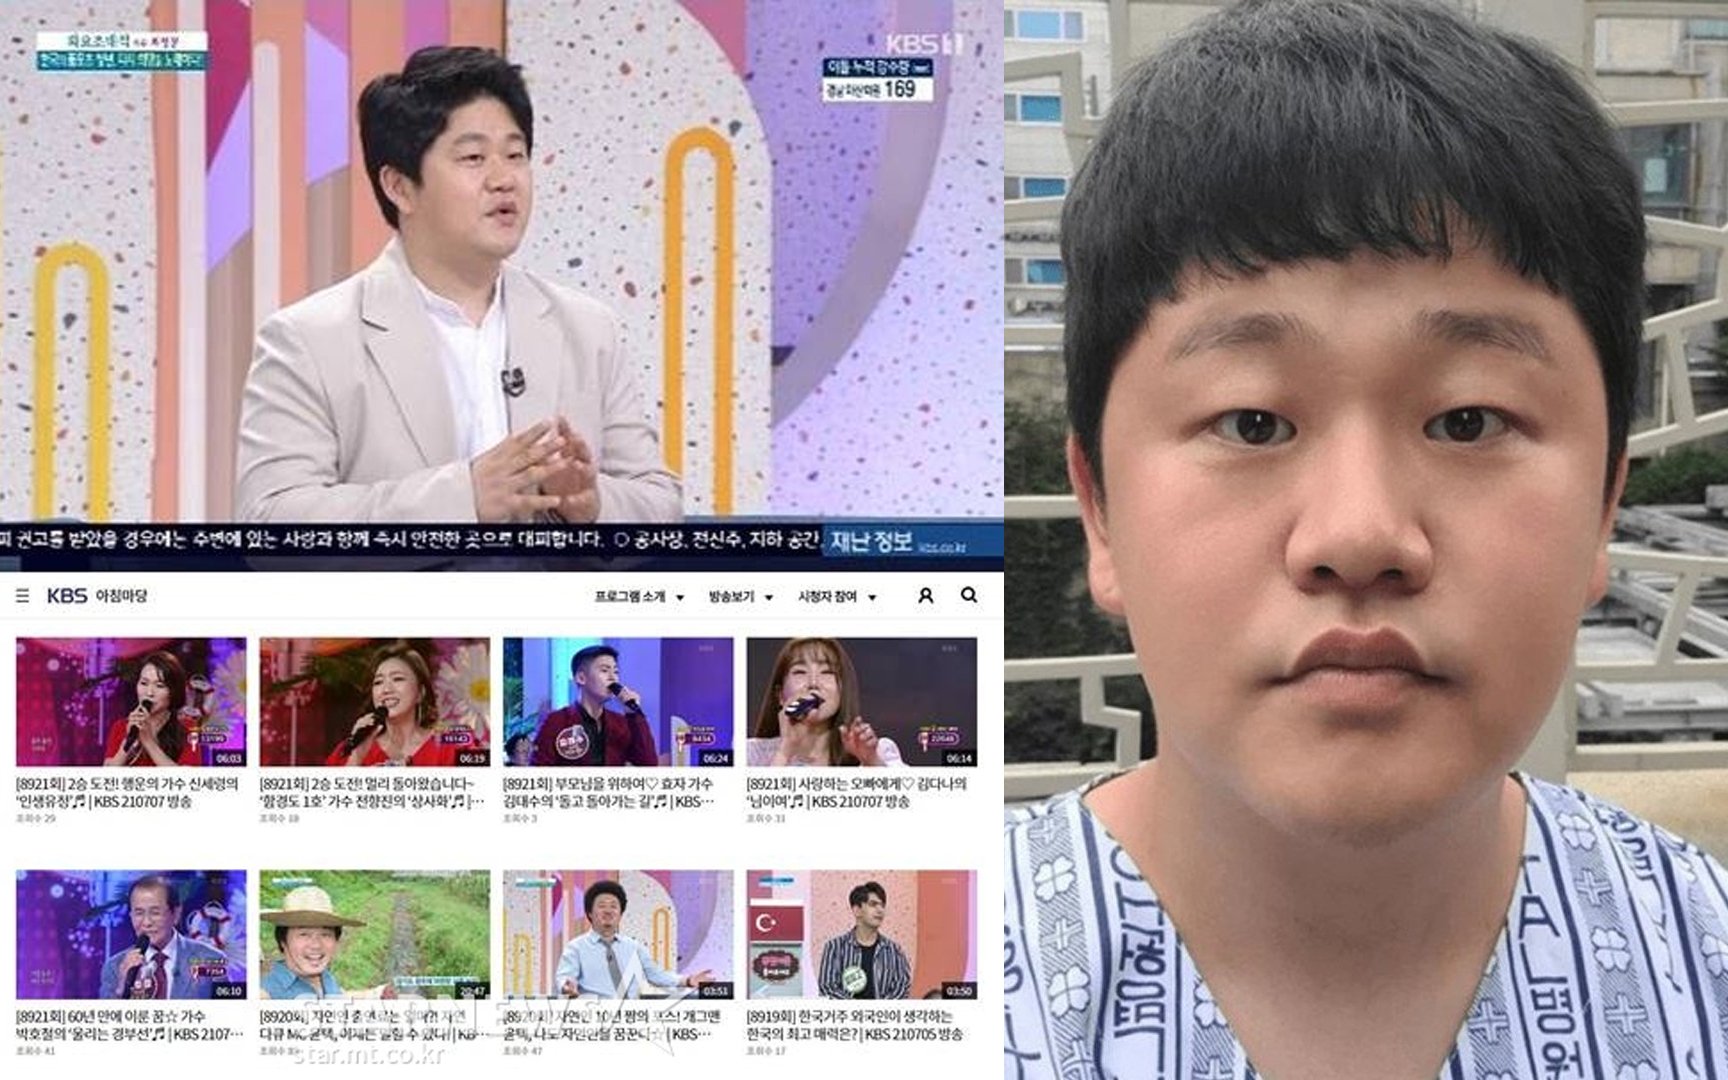 effektivt Withered Parasit Videos of Choi Sung Bong removed from OTT platforms after suspicions of  faking his cancer and using donation money on entertainment businesses |  allkpop